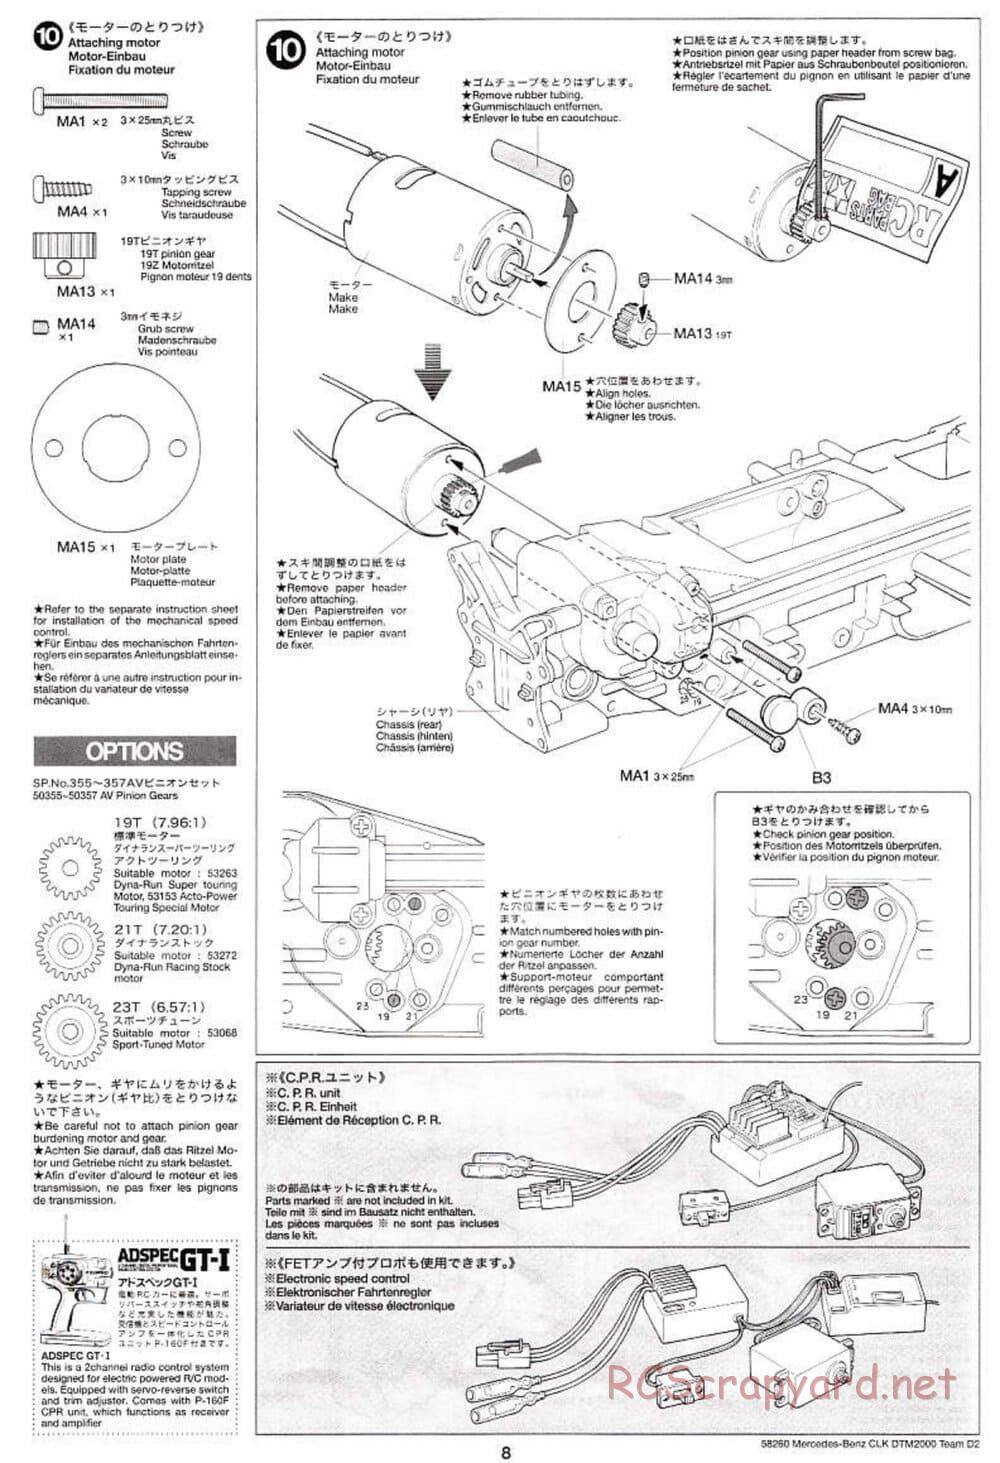 Tamiya - Mercedes Benz CLK DTM 2000 Team D2 - TL-01 Chassis - Manual - Page 8